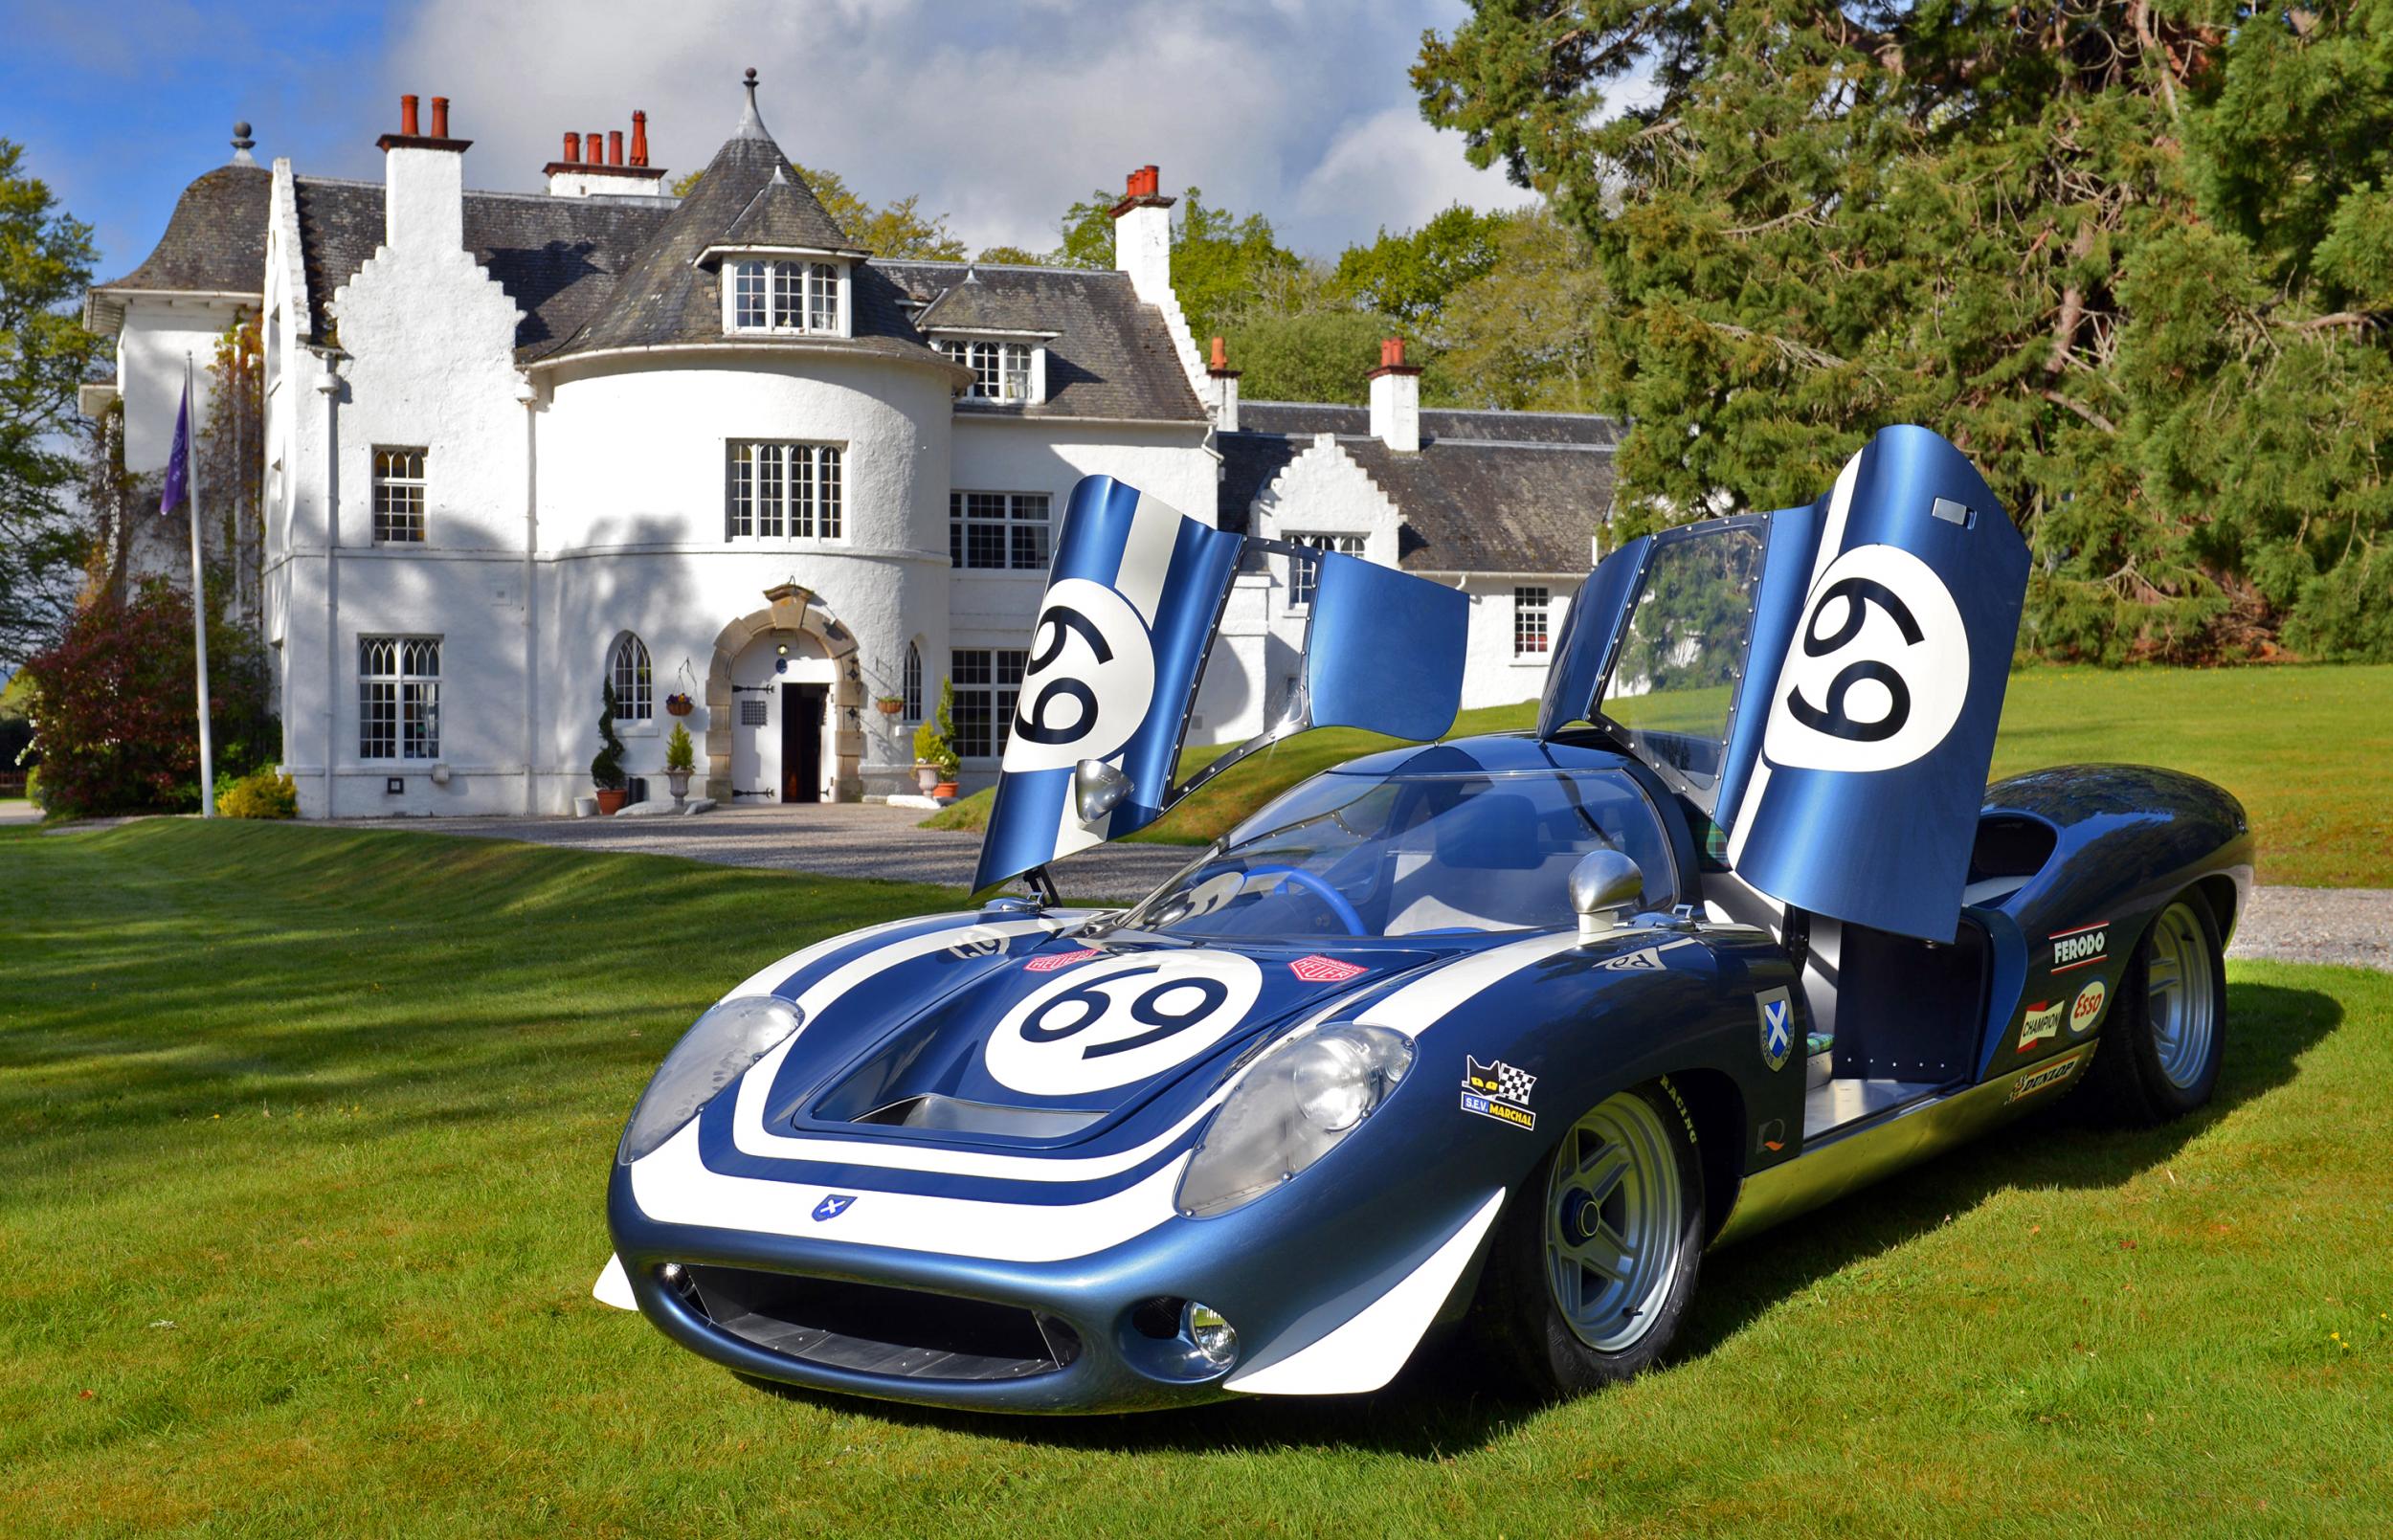 The LM69 evokes the experience of driving a 1960s Le Mans car